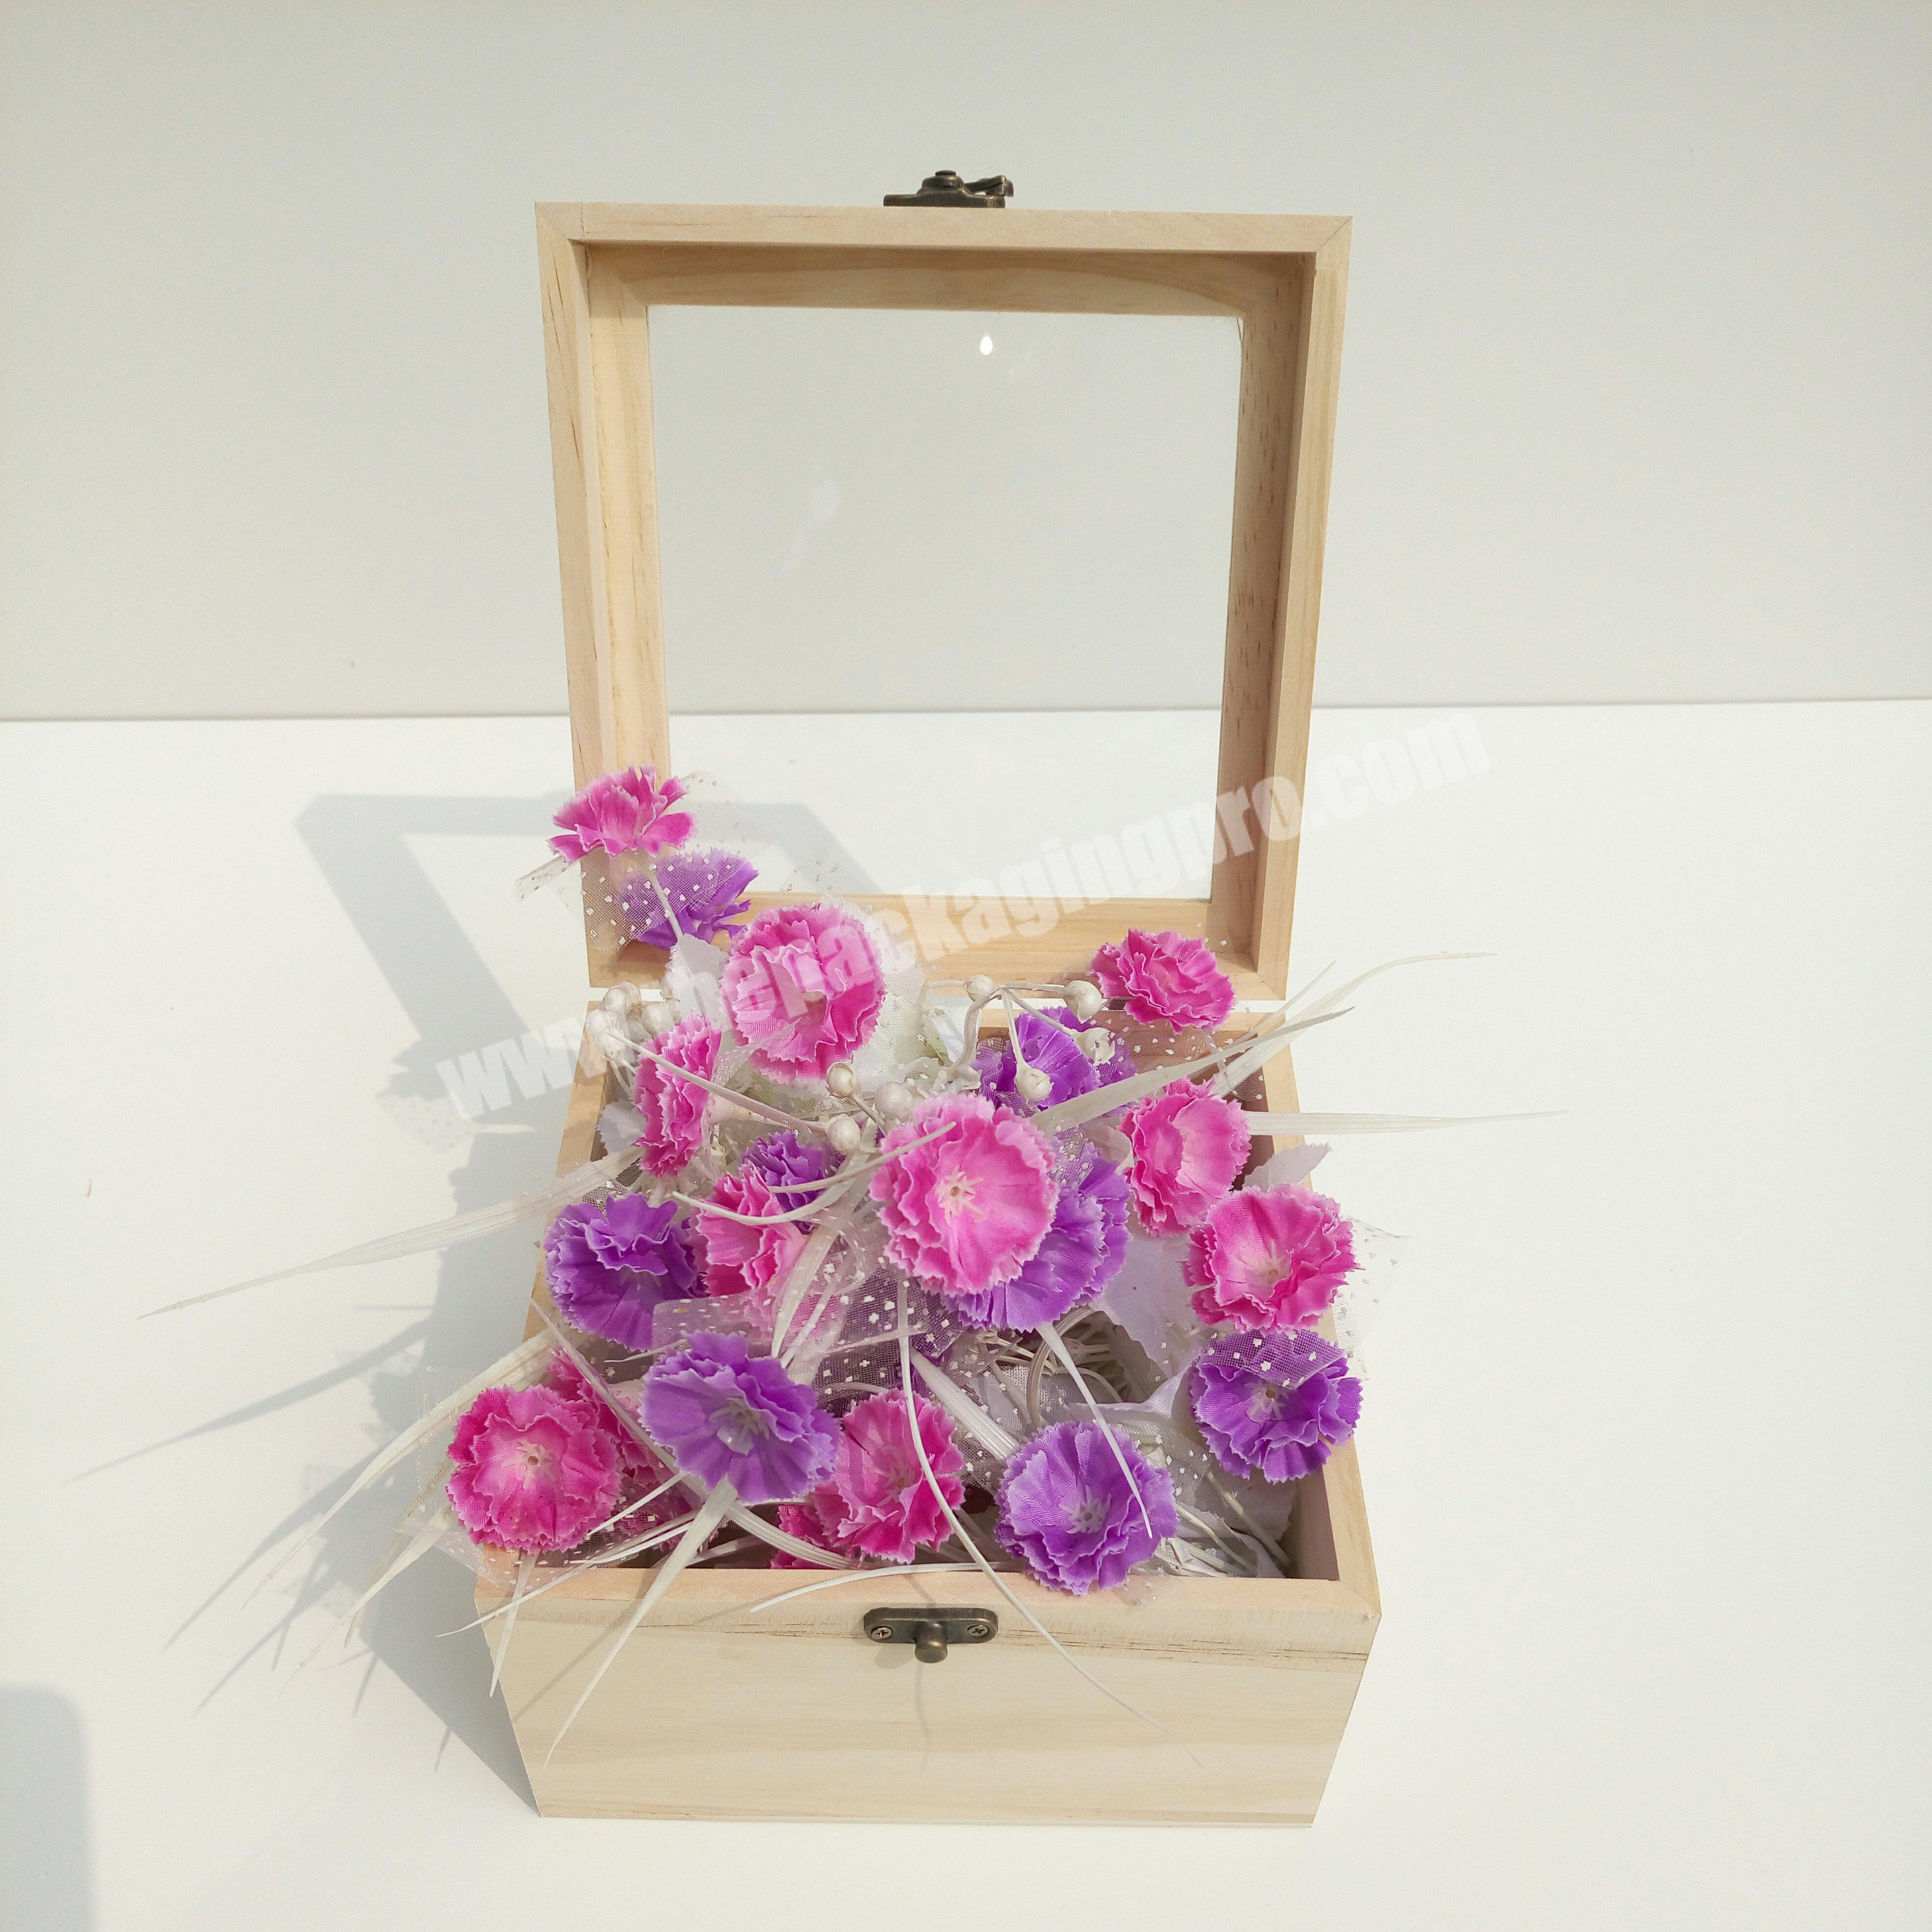 New arrival wooden Immortal rose flower gift packaging box clear glass window wood flower arrangement square storage box